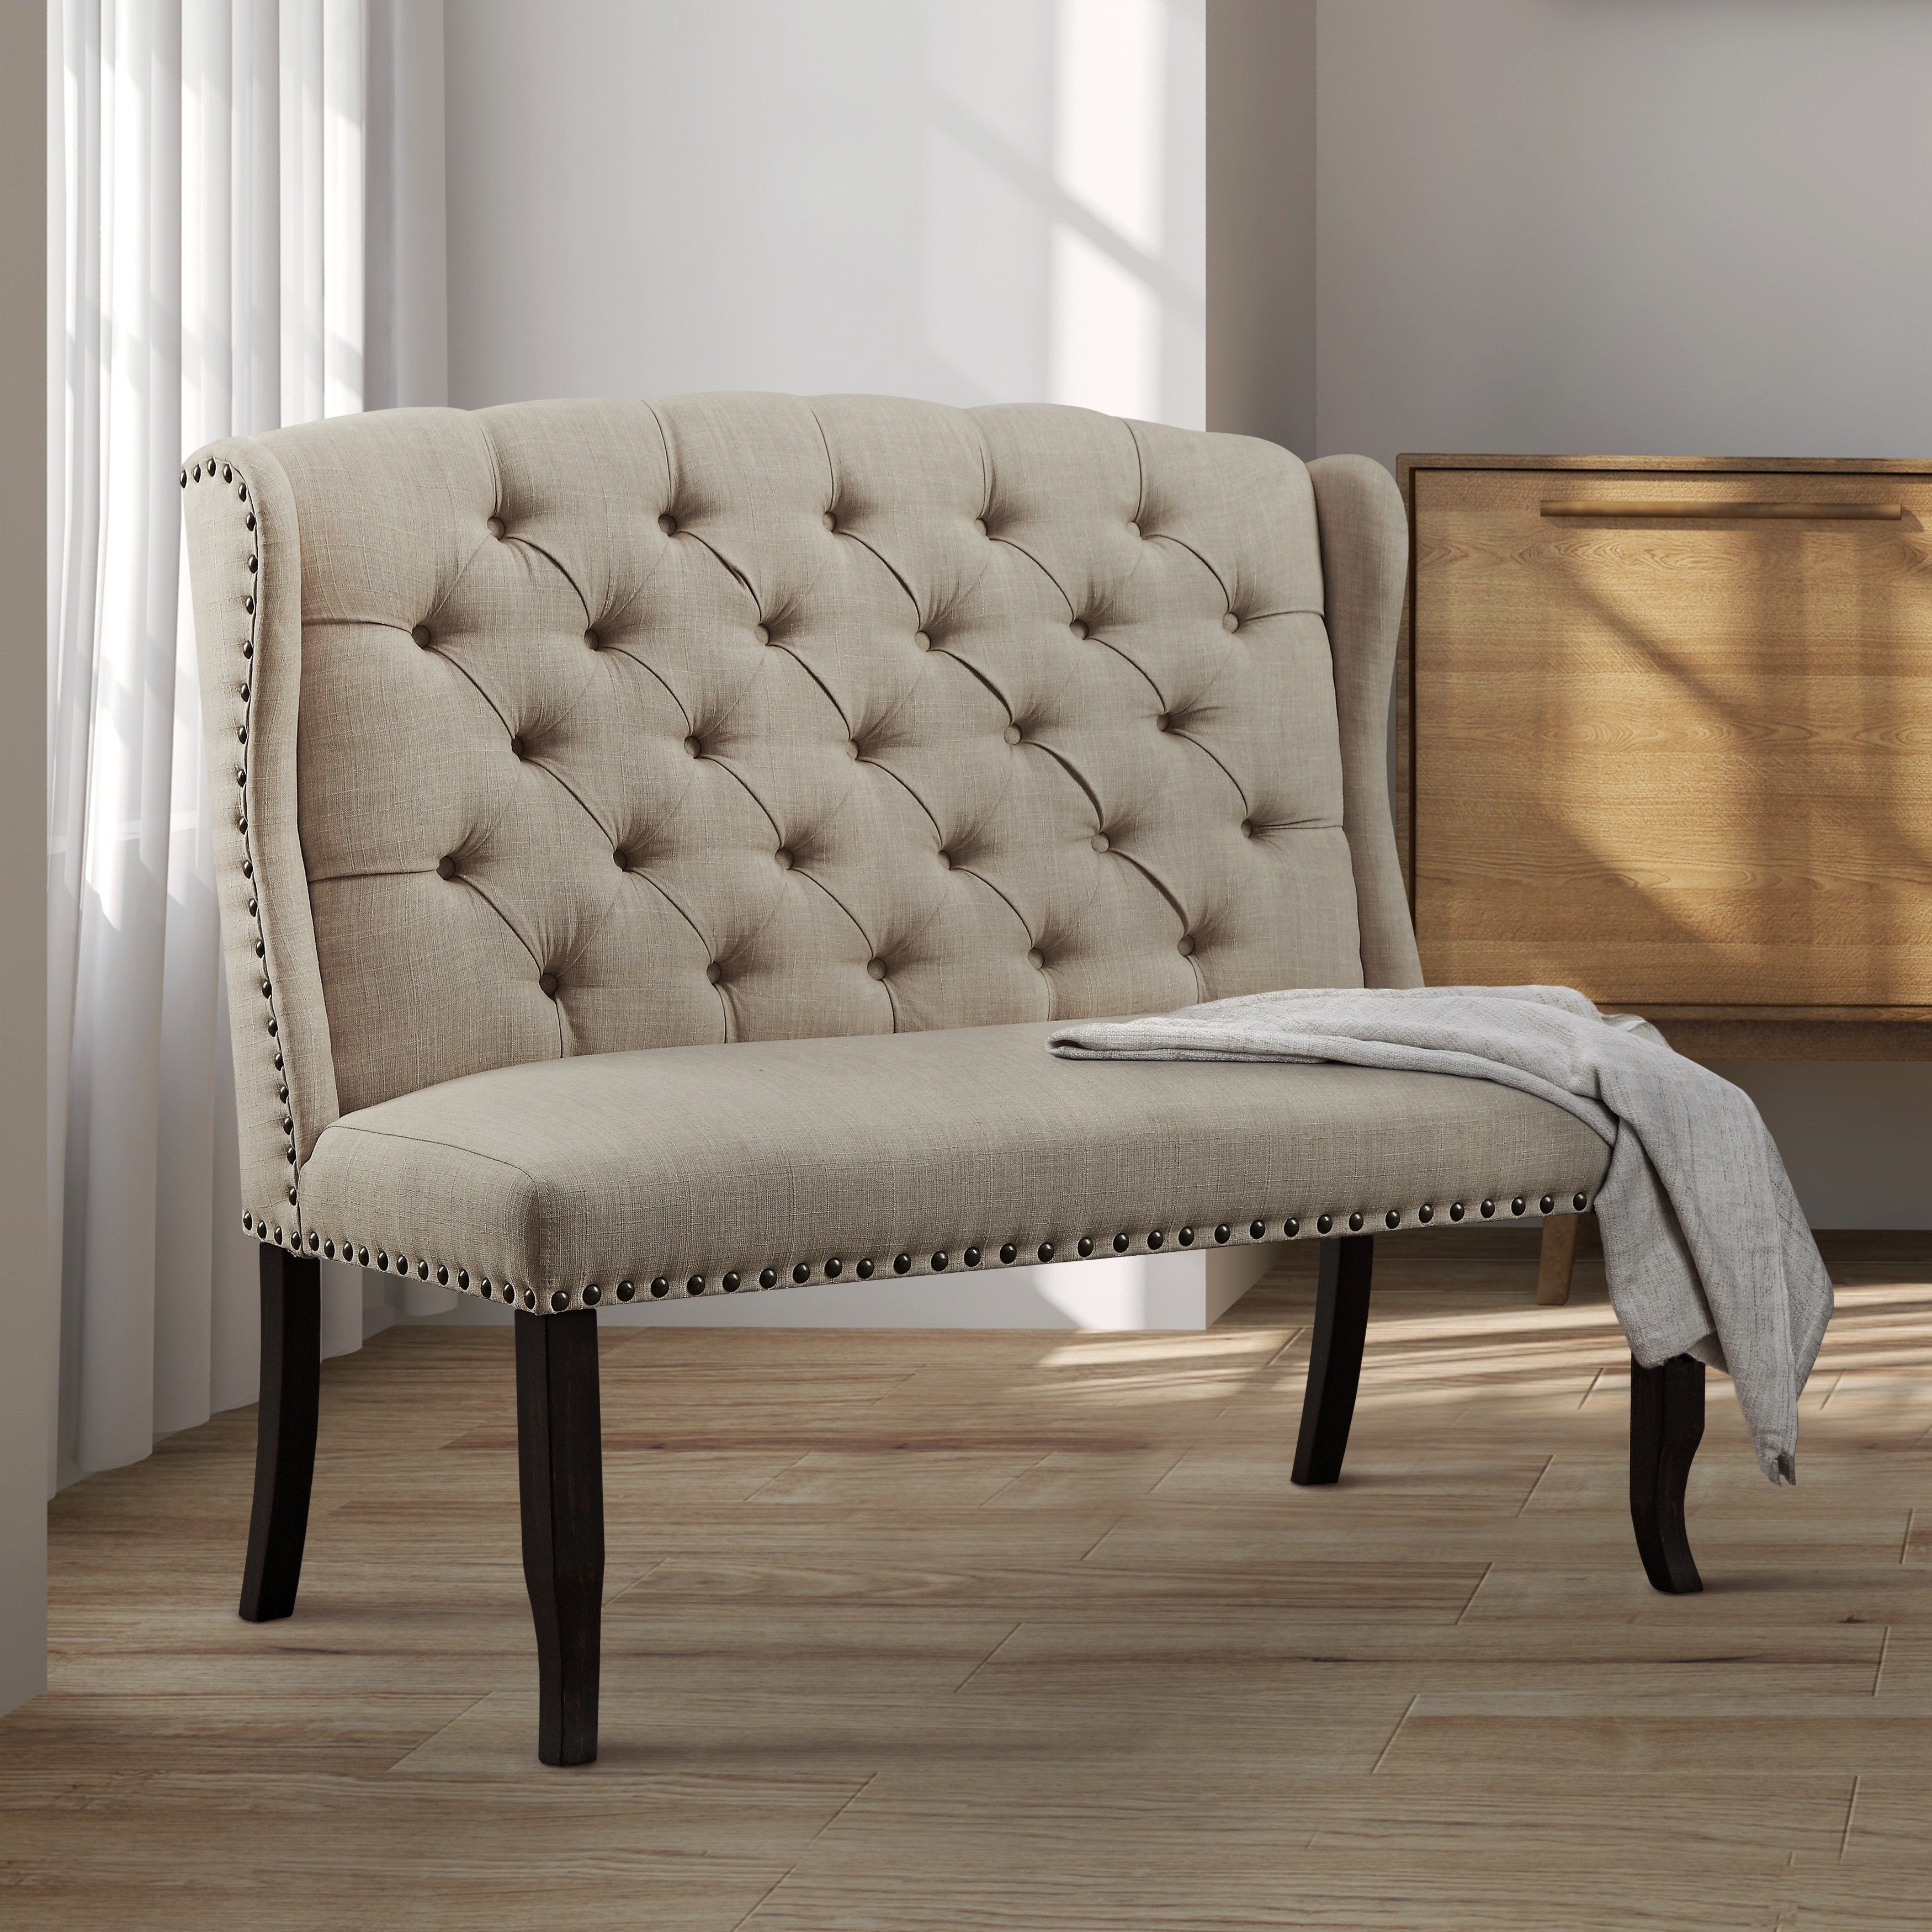 Shop Furniture of America Telara Contemporary Tufted Wingback Loveseat  Dining Bench - Free Shipping On Orders Over $45 - Overstock - 12496024